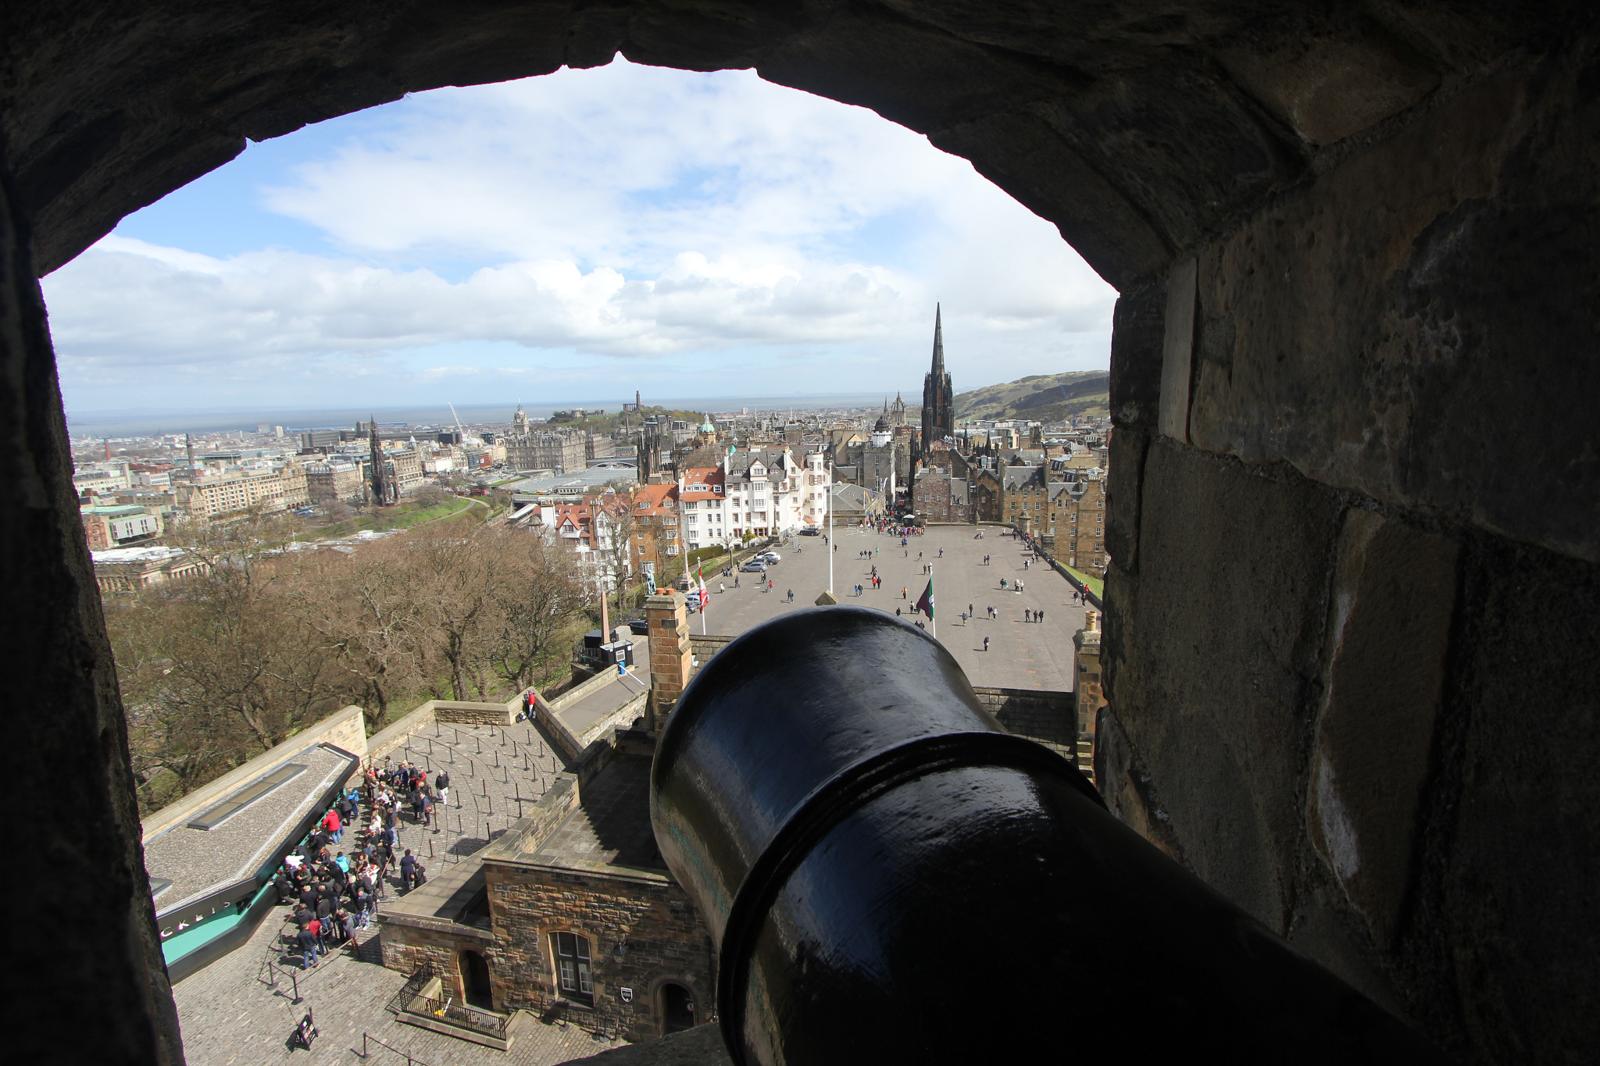 The View from the Castle